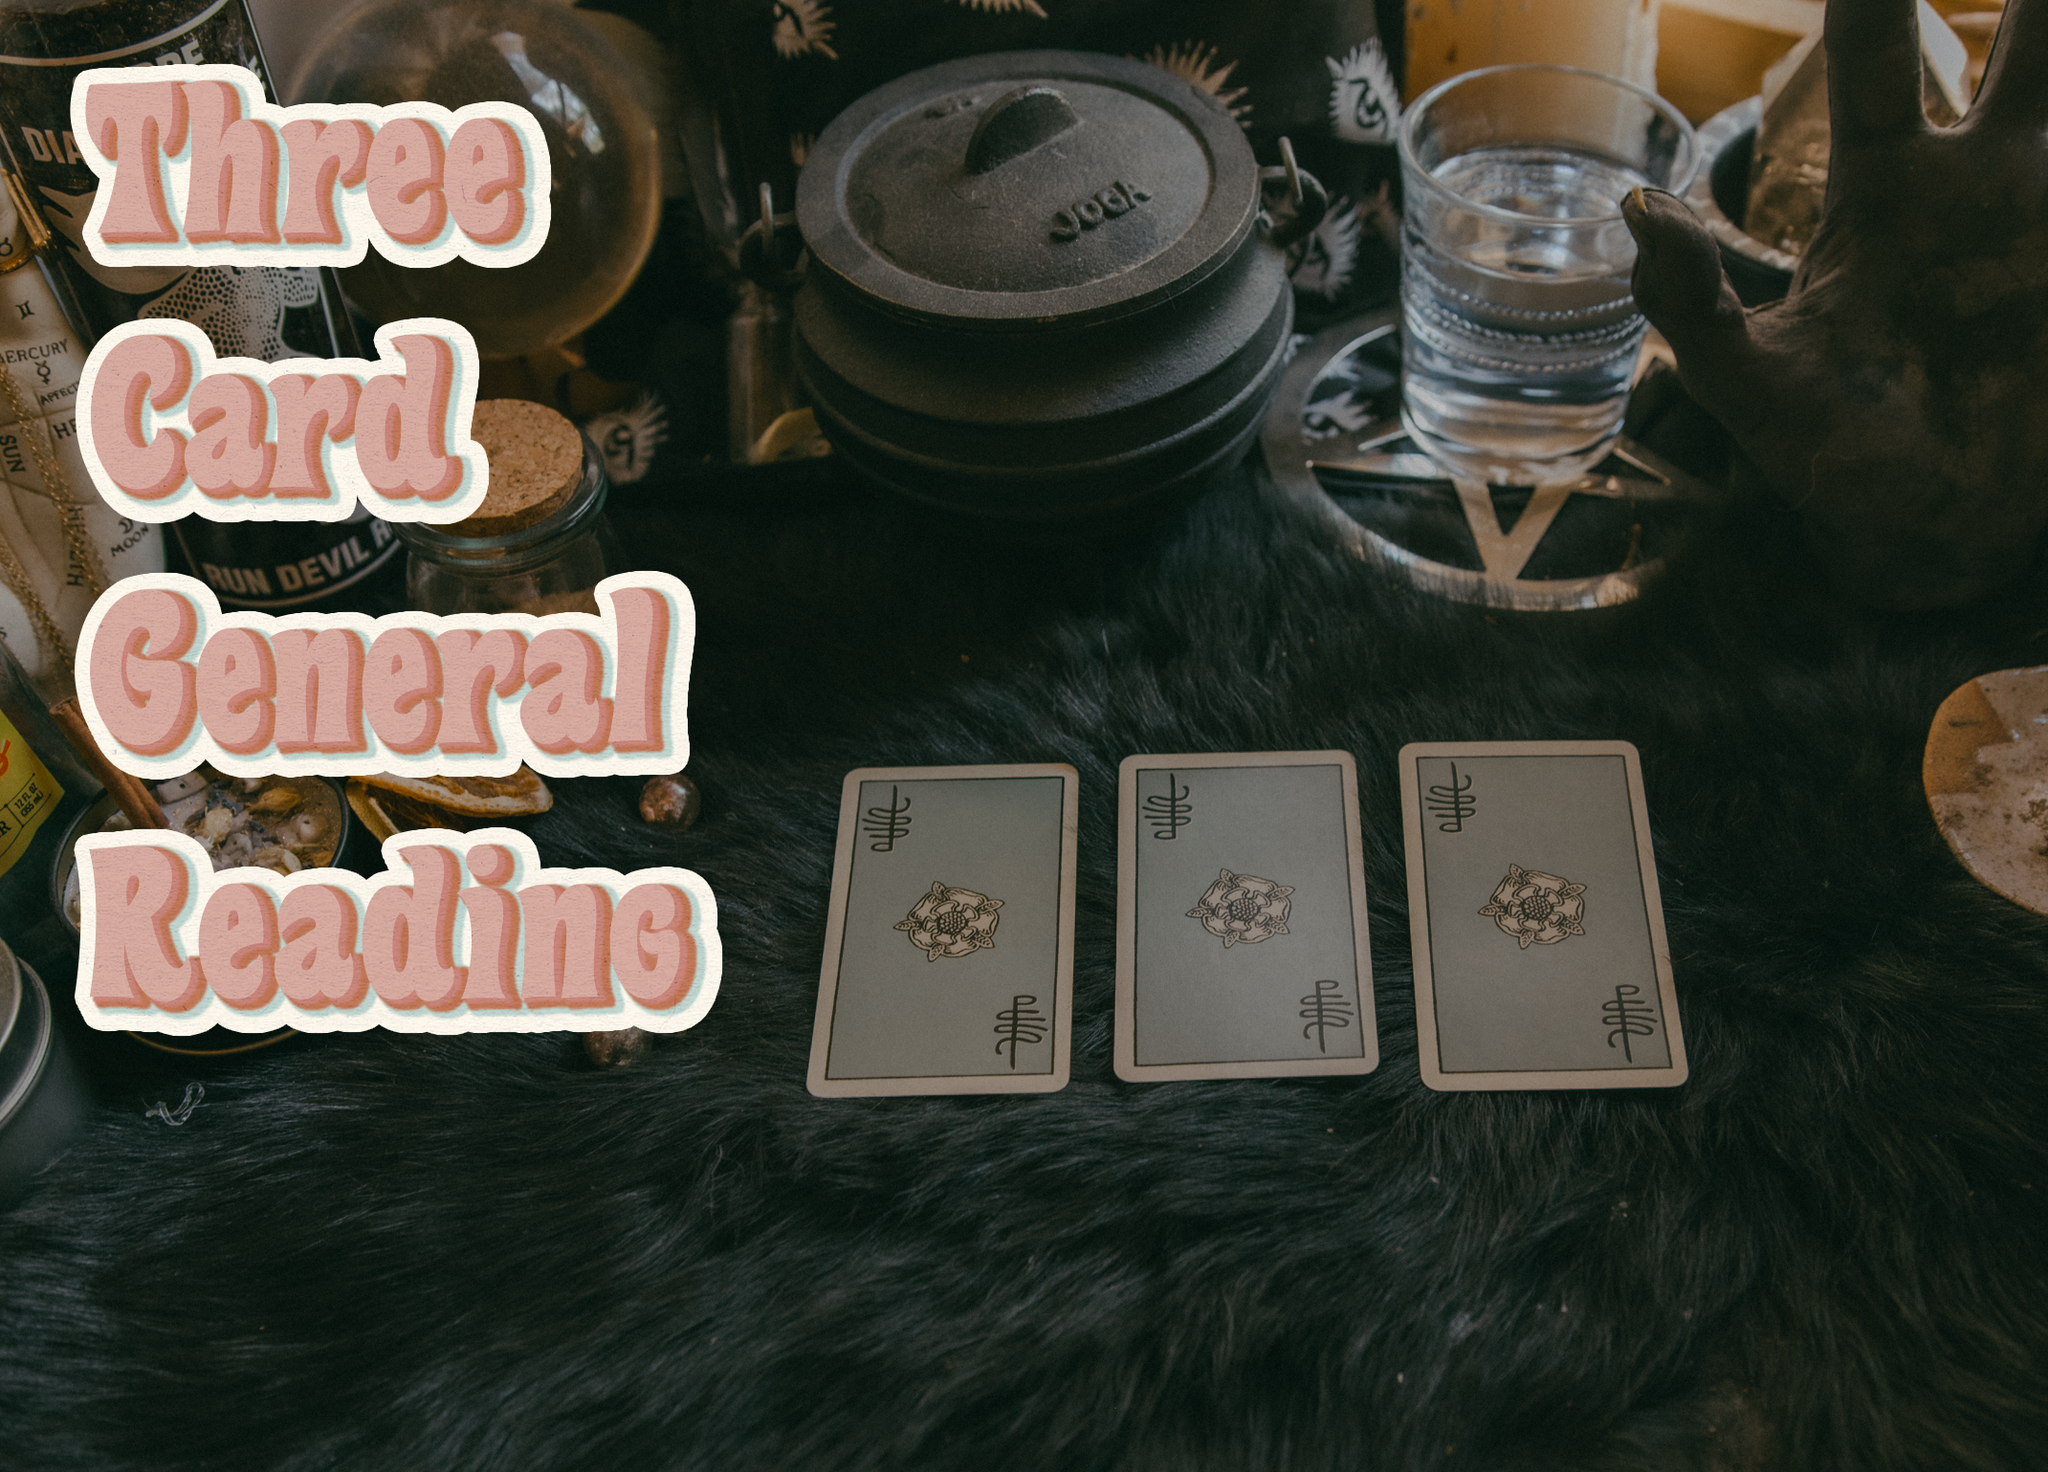 3 Card General Reading